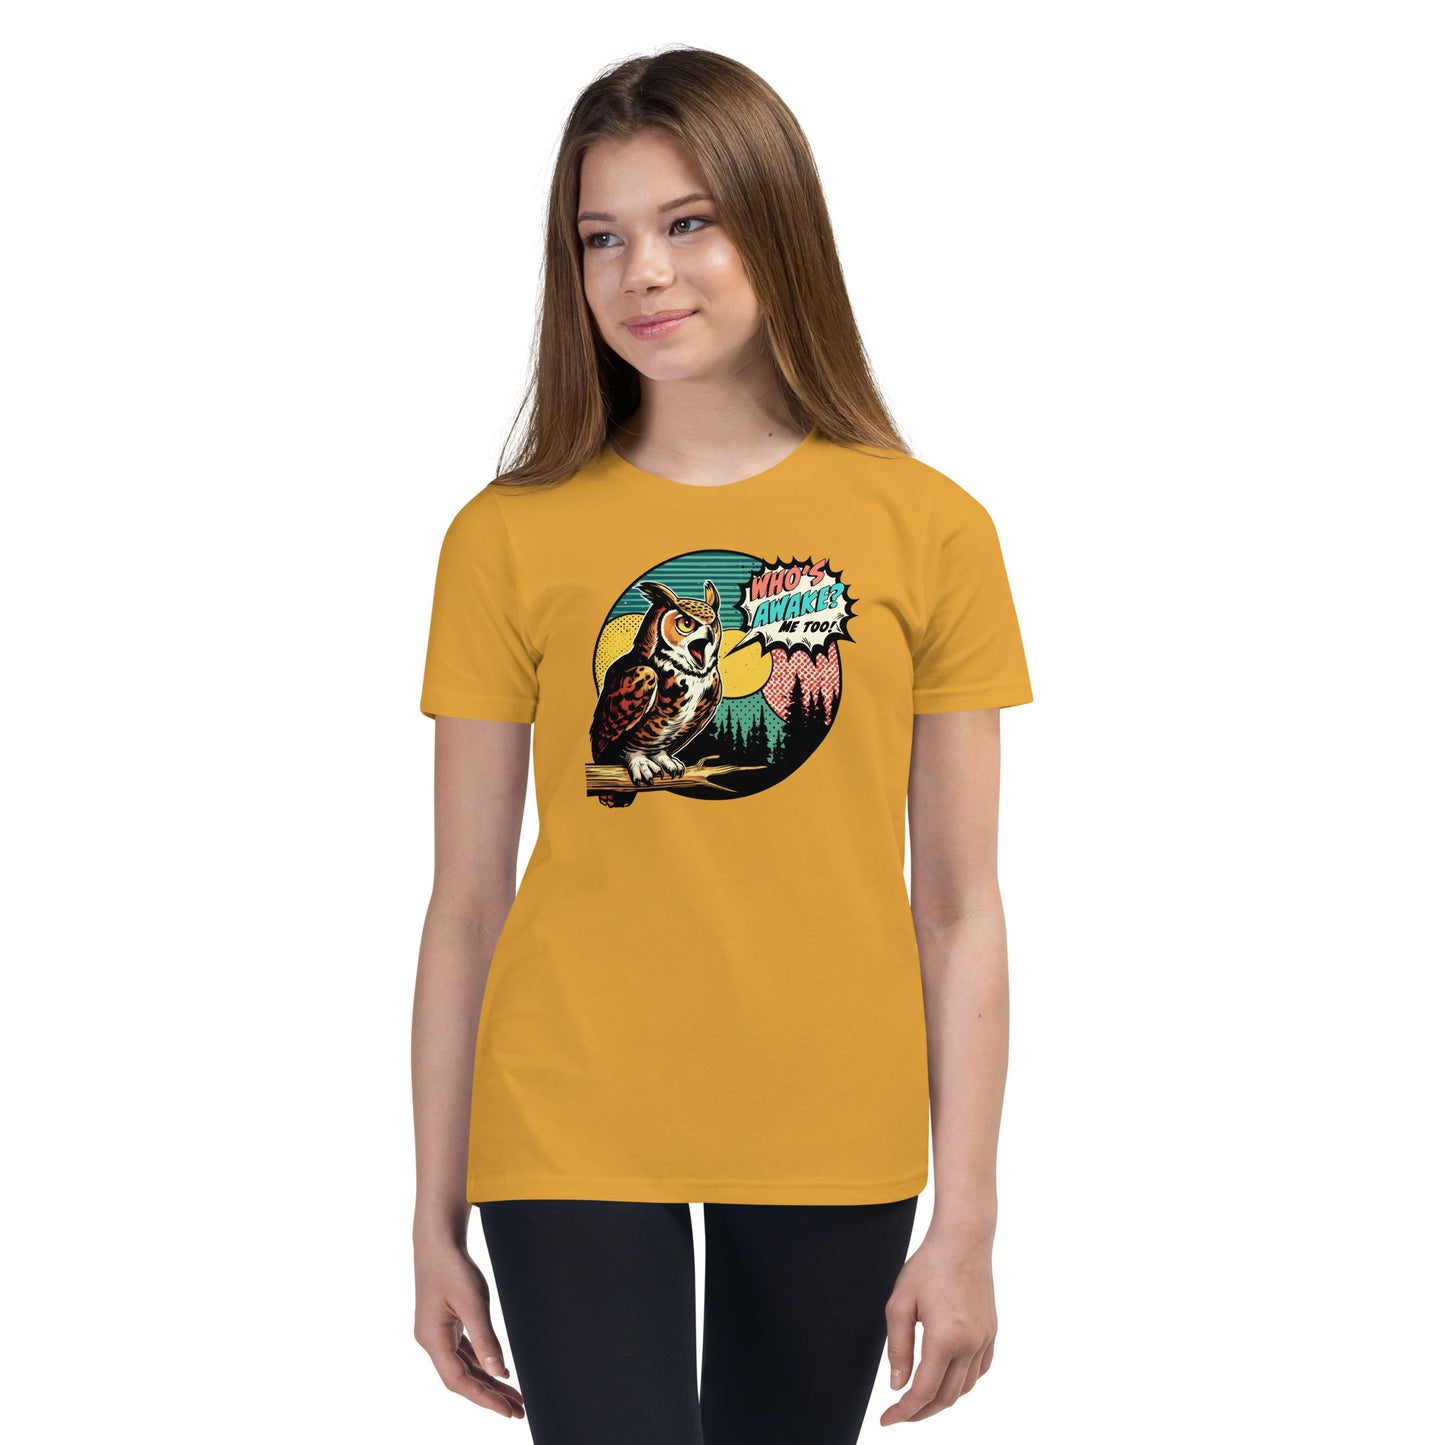 Great Horned Owl Youth Short Sleeve T-Shirt